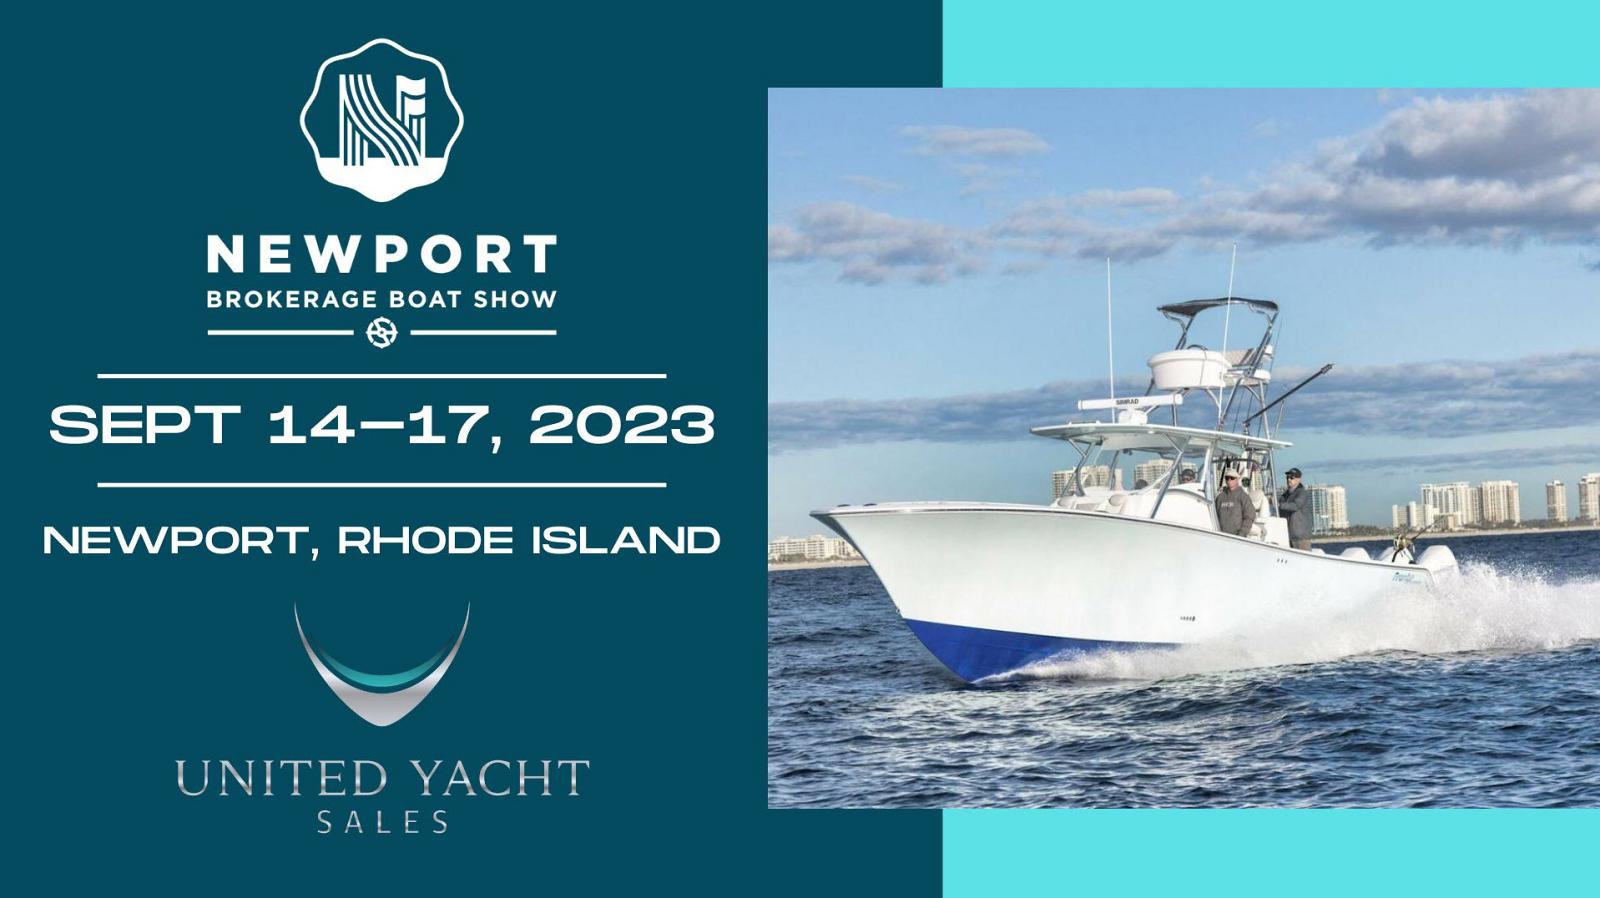 The Newport International Boat Show United Yacht Sales